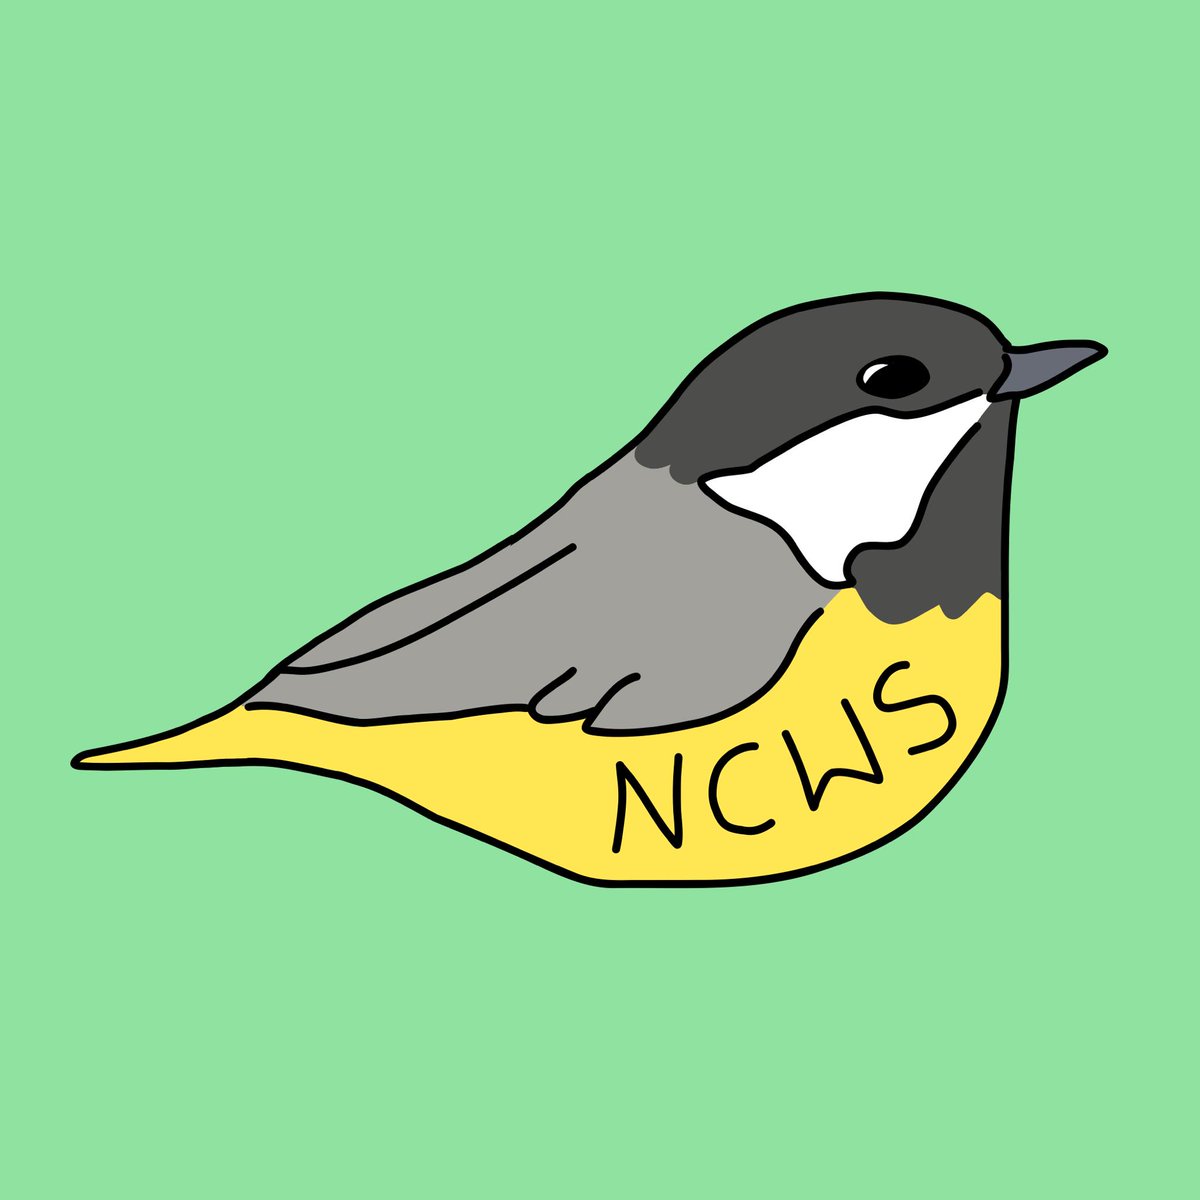 Interested in #WildlifeConservation and the outdoors? #GetInvolved Join the Northumerland College Wildlife Society! Created by our #HigherEducation conservation learners and led by students. 🐦 Find out more by emailing conservation.society@northumberland.ac.uk